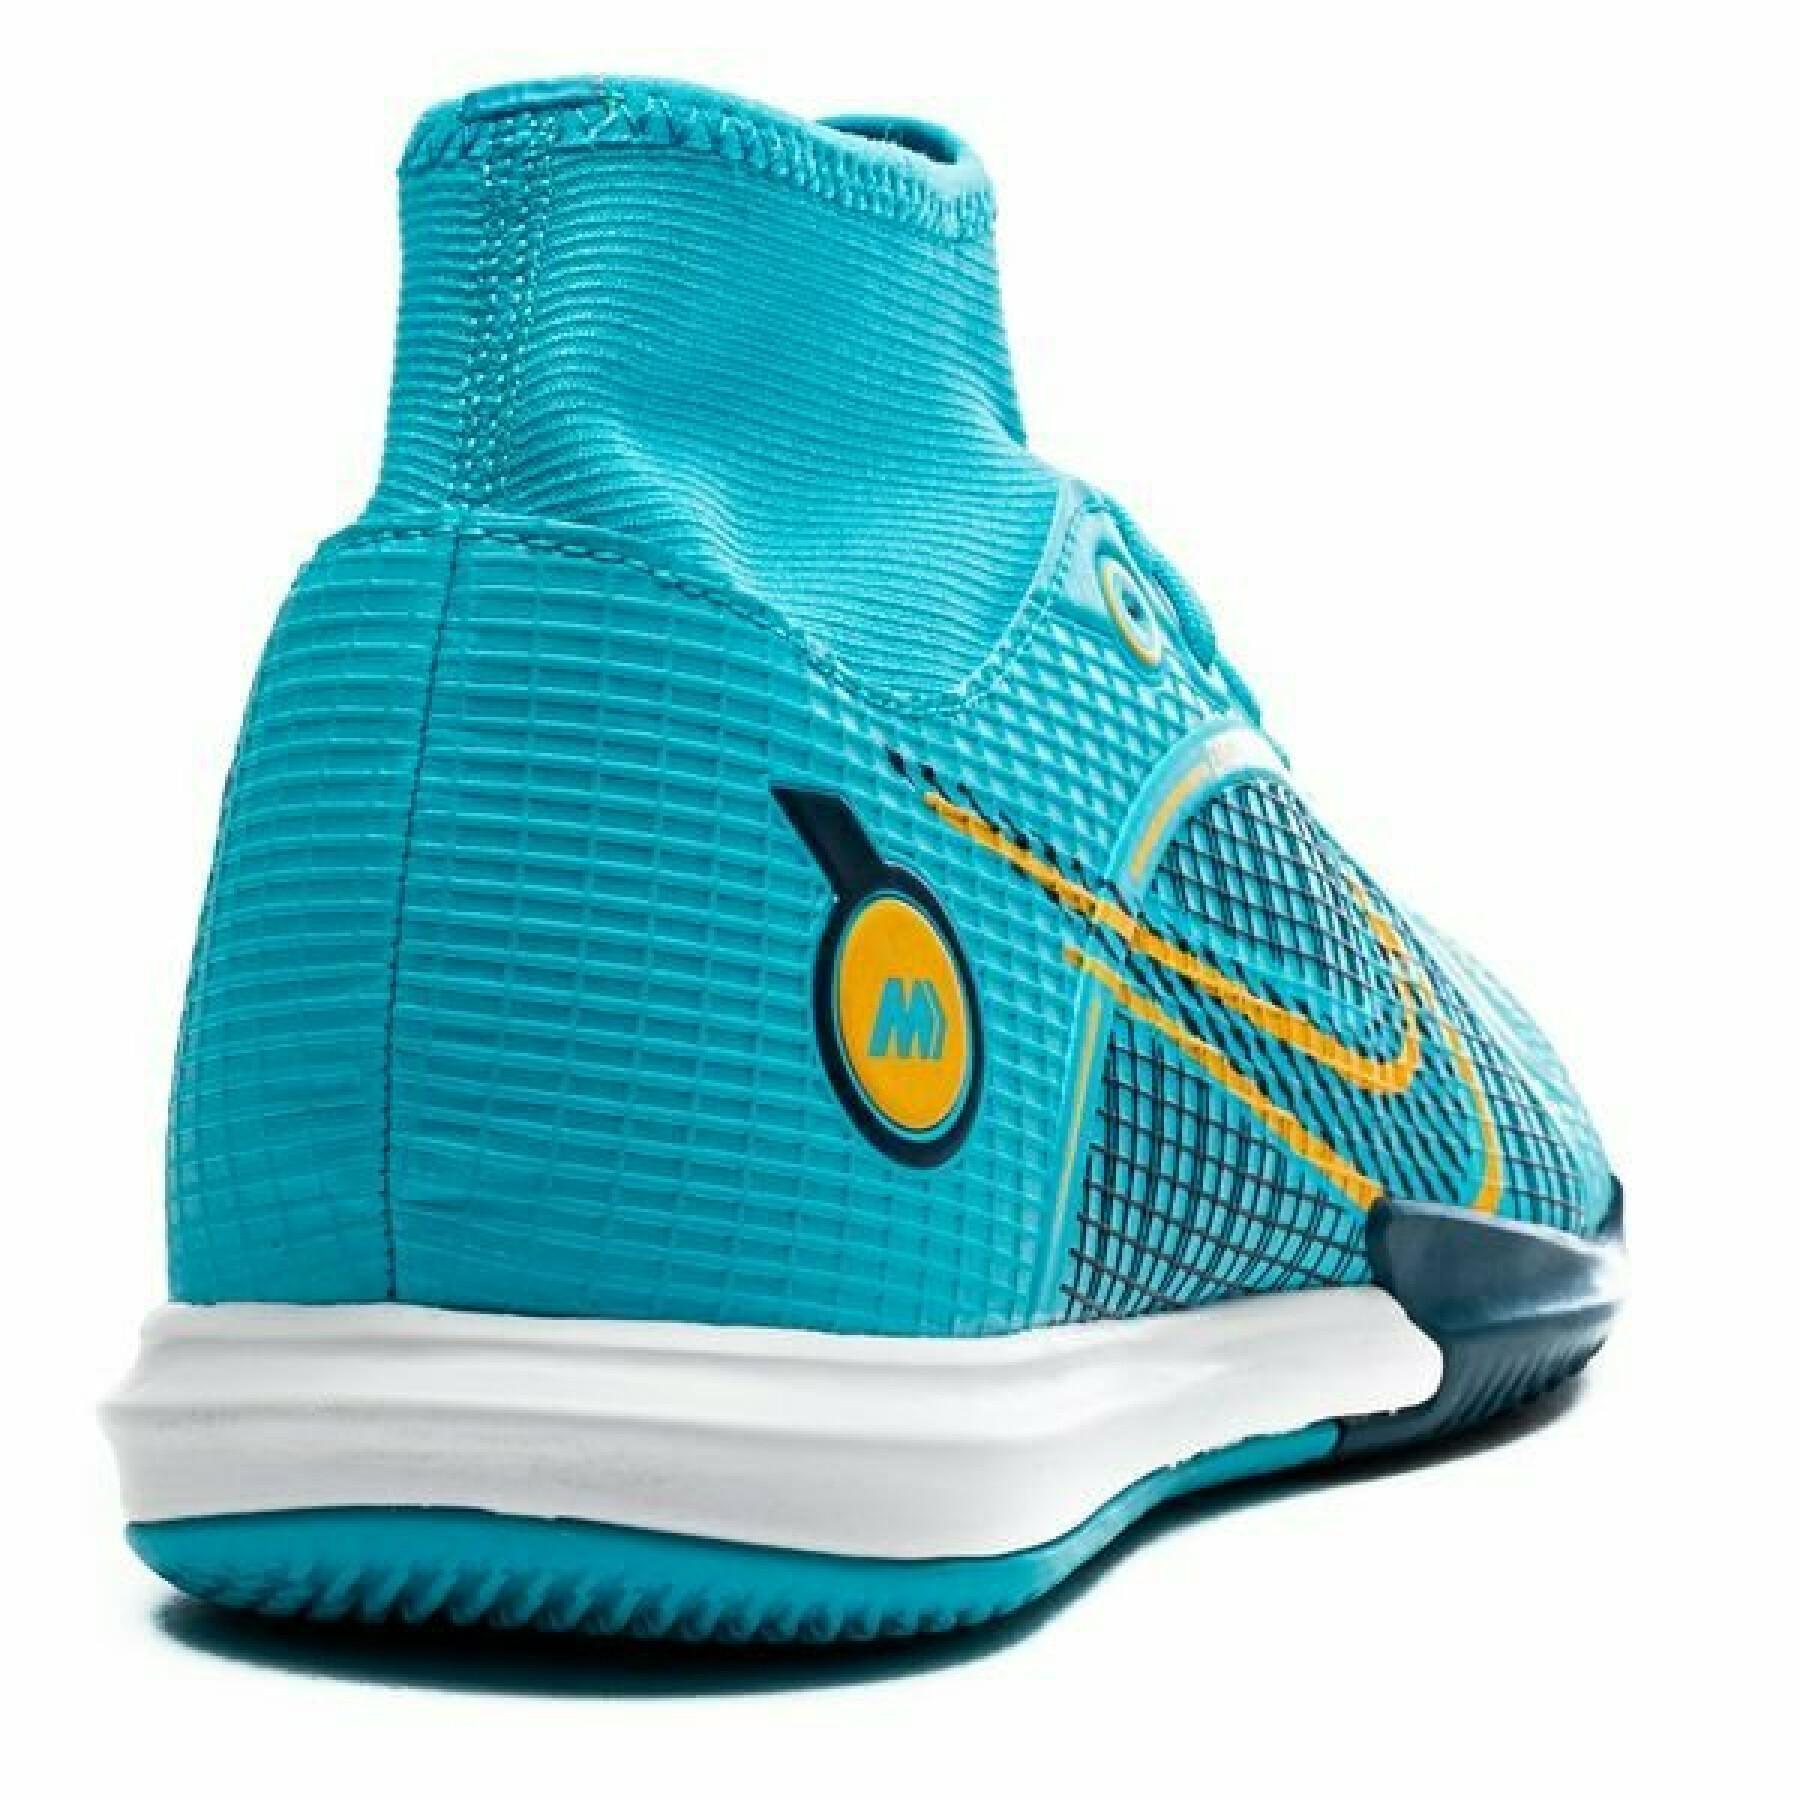 Soccer shoes Nike Superfly 8 academy IC -Blueprint Pack